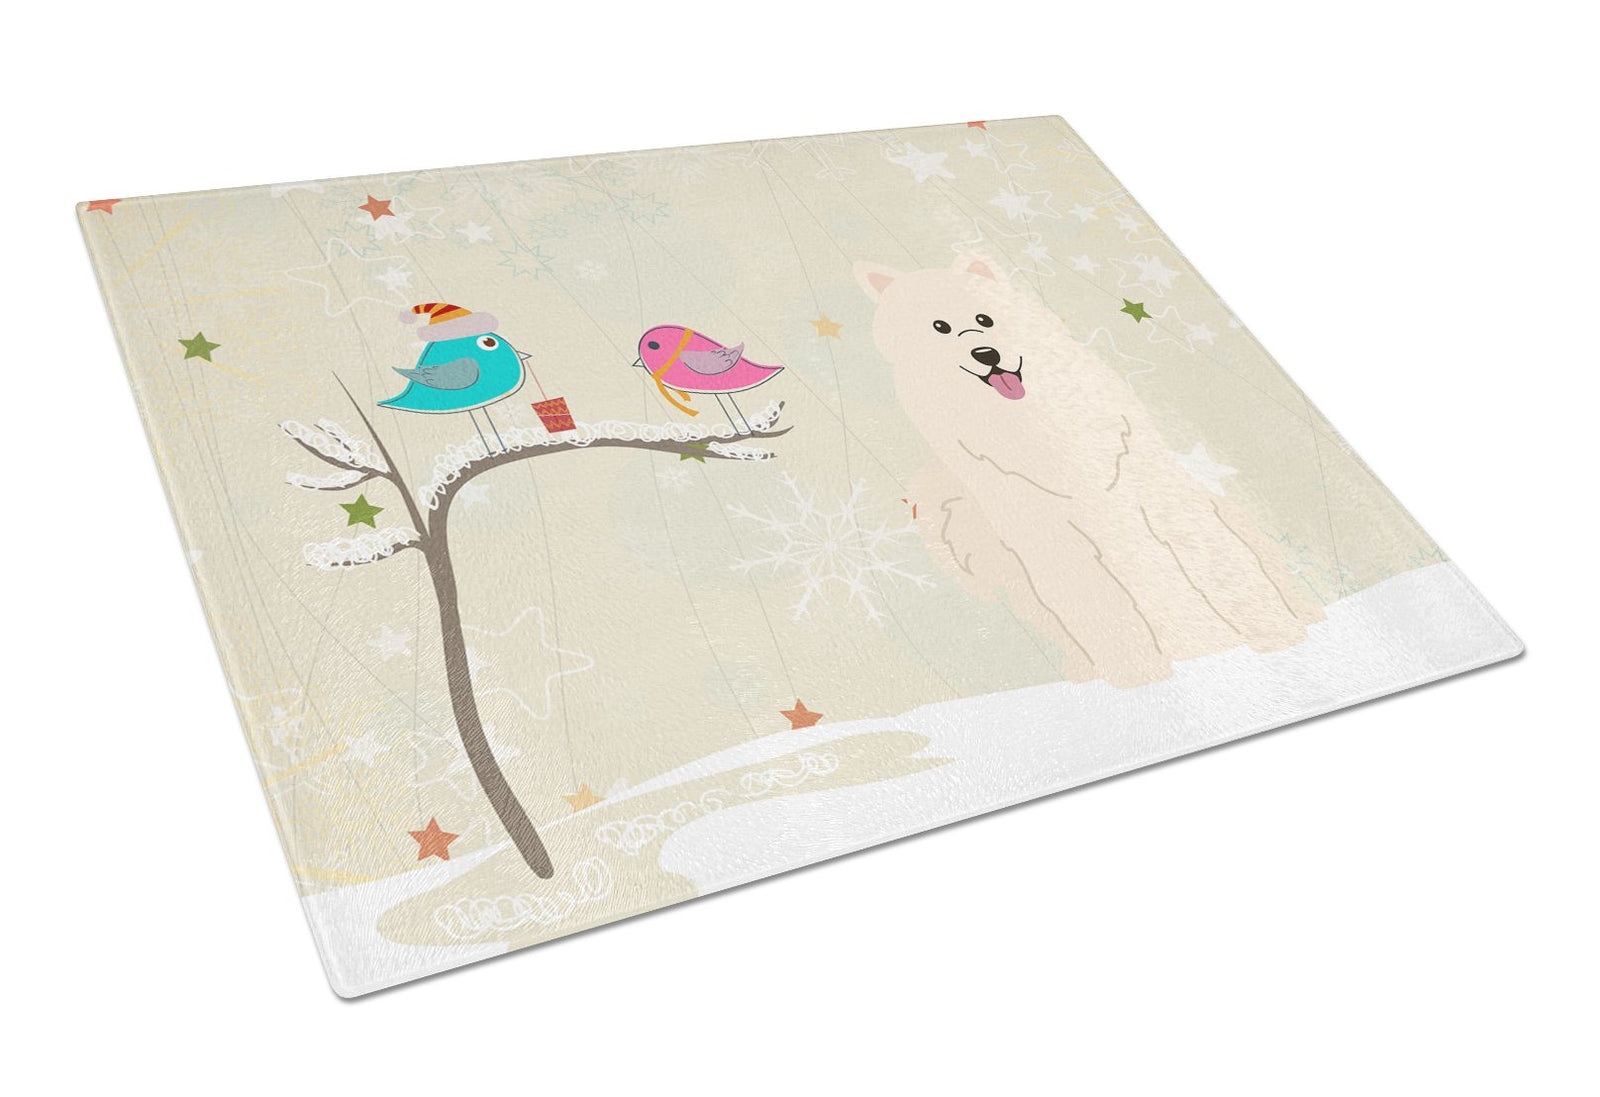 Christmas Presents between Friends Samoyed Glass Cutting Board Large BB2502LCB by Caroline's Treasures